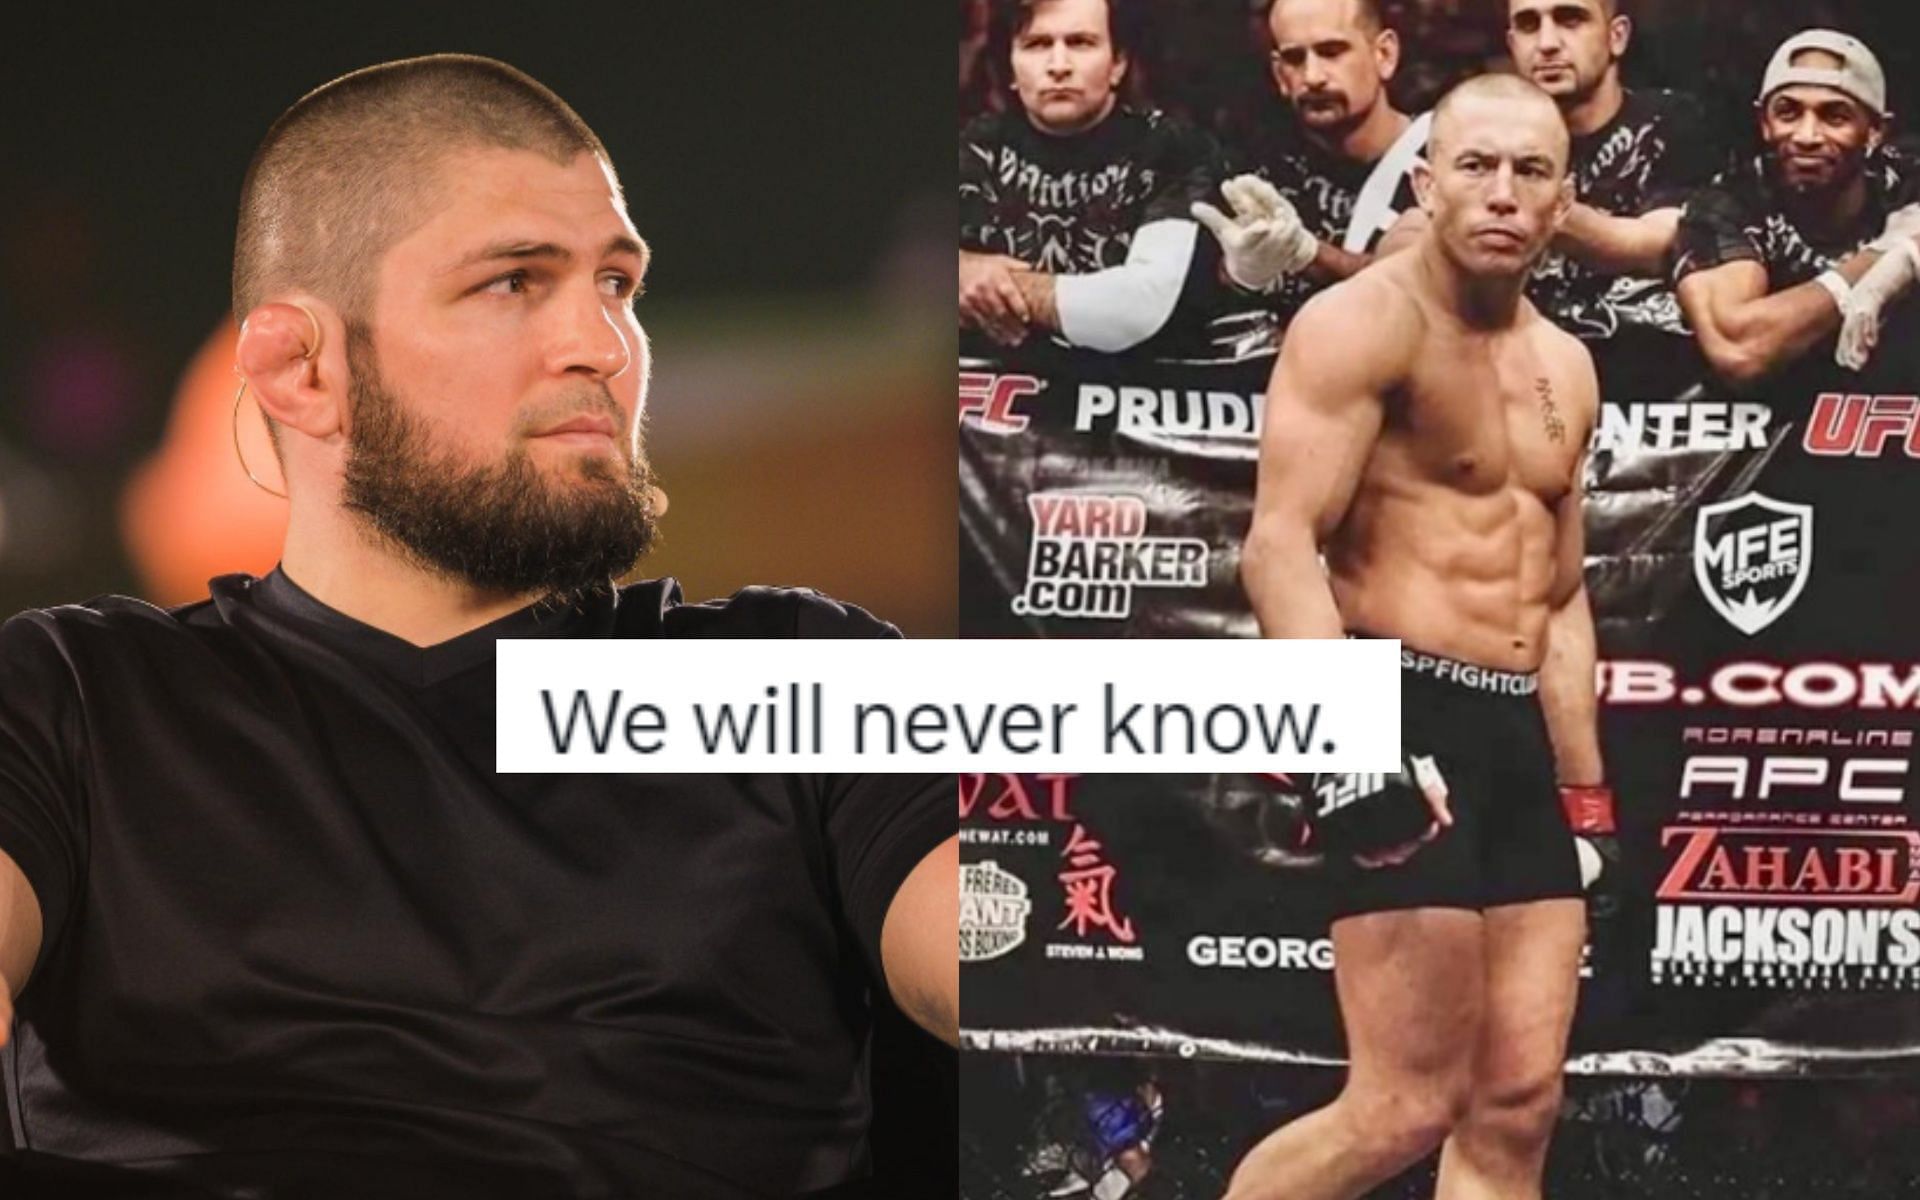 Fans have long discussed a fight between Khabib Nurmagomedov (L) and Georges St-Pierre (R). [Images via @khabib_nurmagomedov and @georgesstpierre on Instagram]